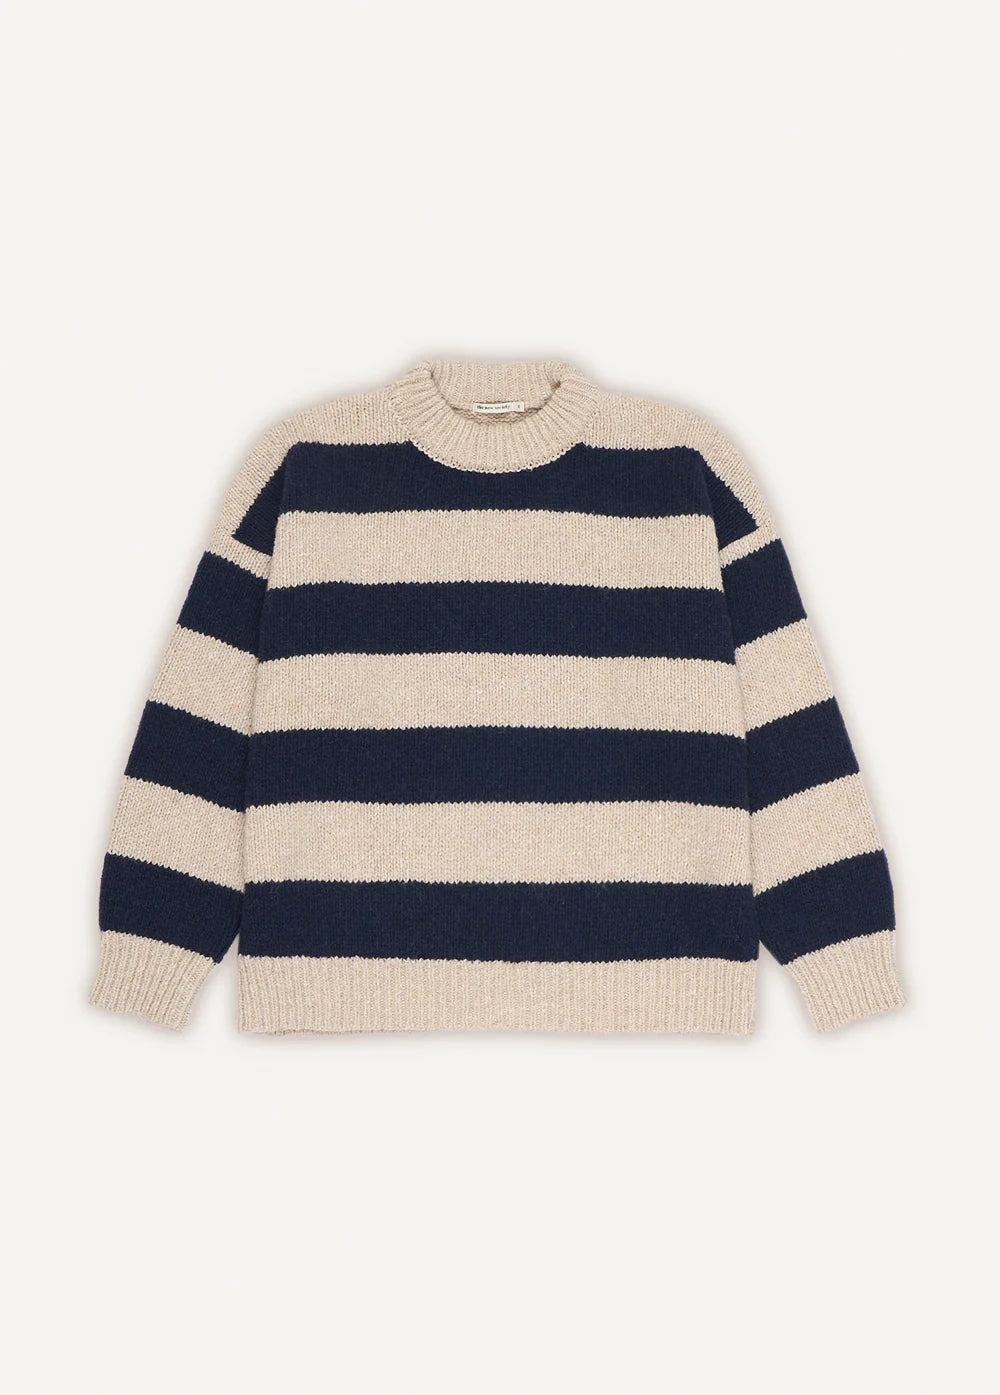 TIRSO STRIPES WOMAN JUMPER - SAND & SPACE BLUE KNIT SRIPES, THE NEW SOCIETY